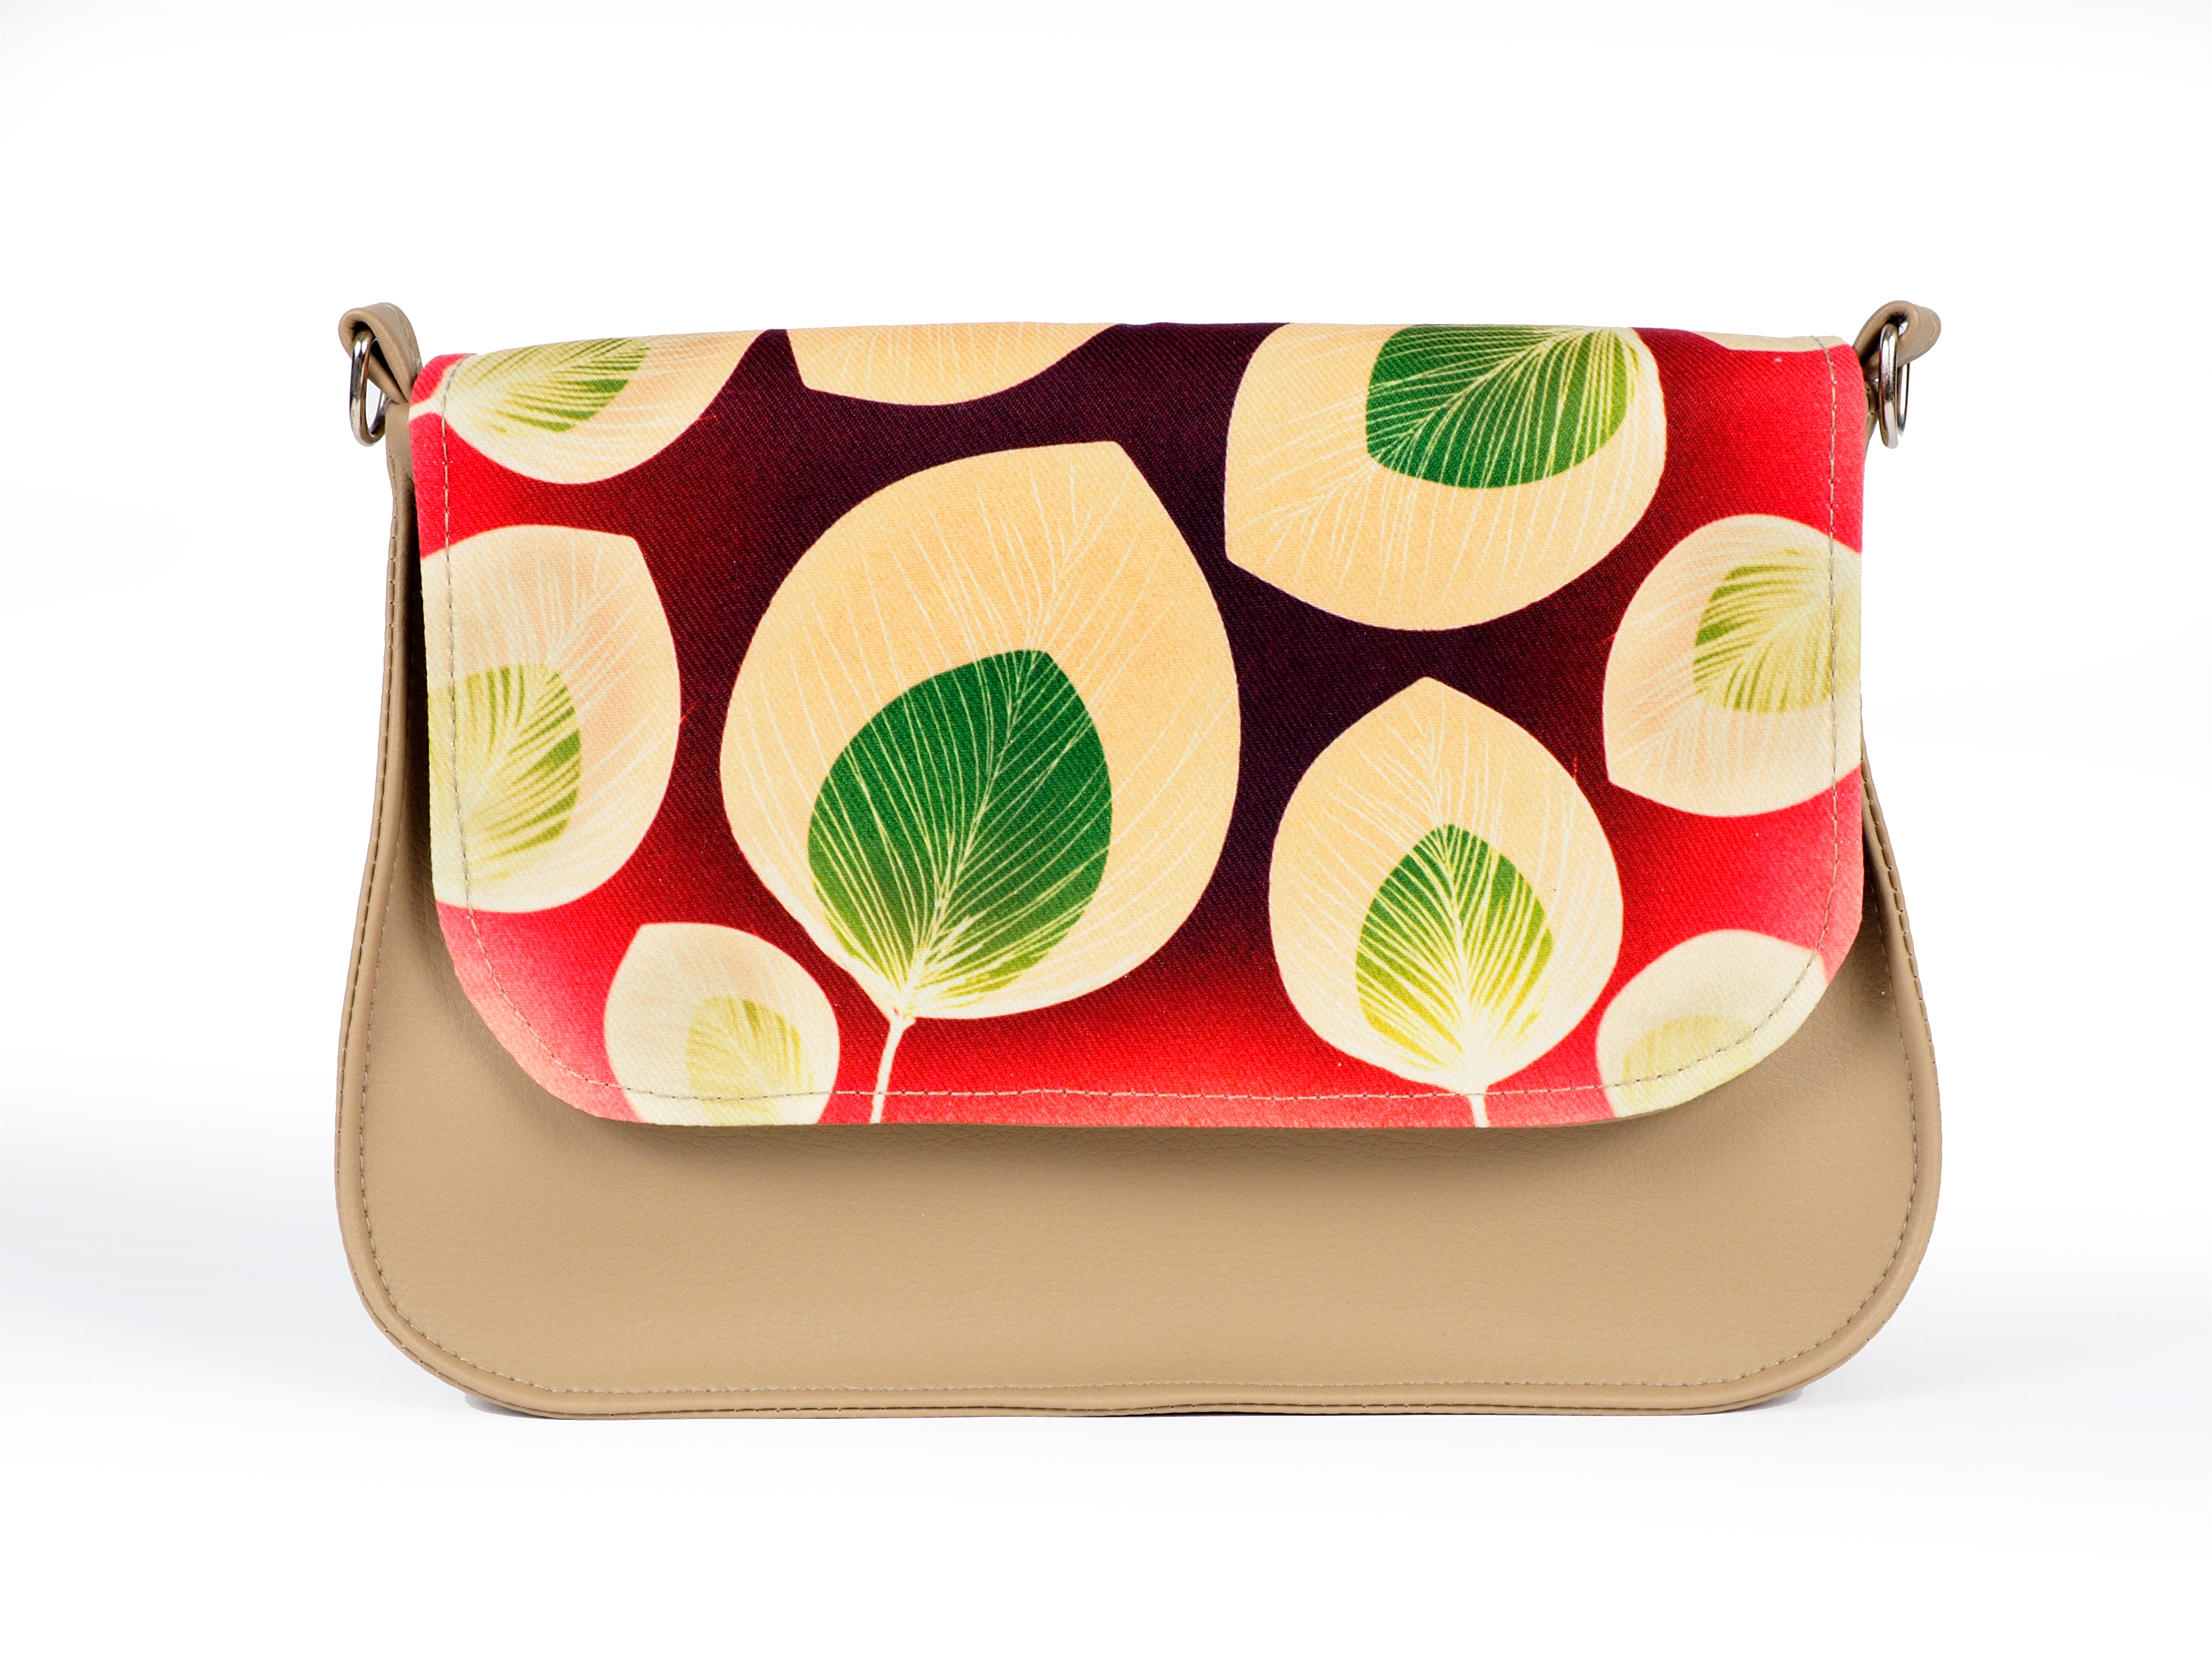 Bardo box bag - Rosily - Premium bardo box bag from spring - Just lvbeige, floral, flowers, gift, handemade, leaves, nature, vegan leather, woman52.00! Shop now at BARDO ART WORKS